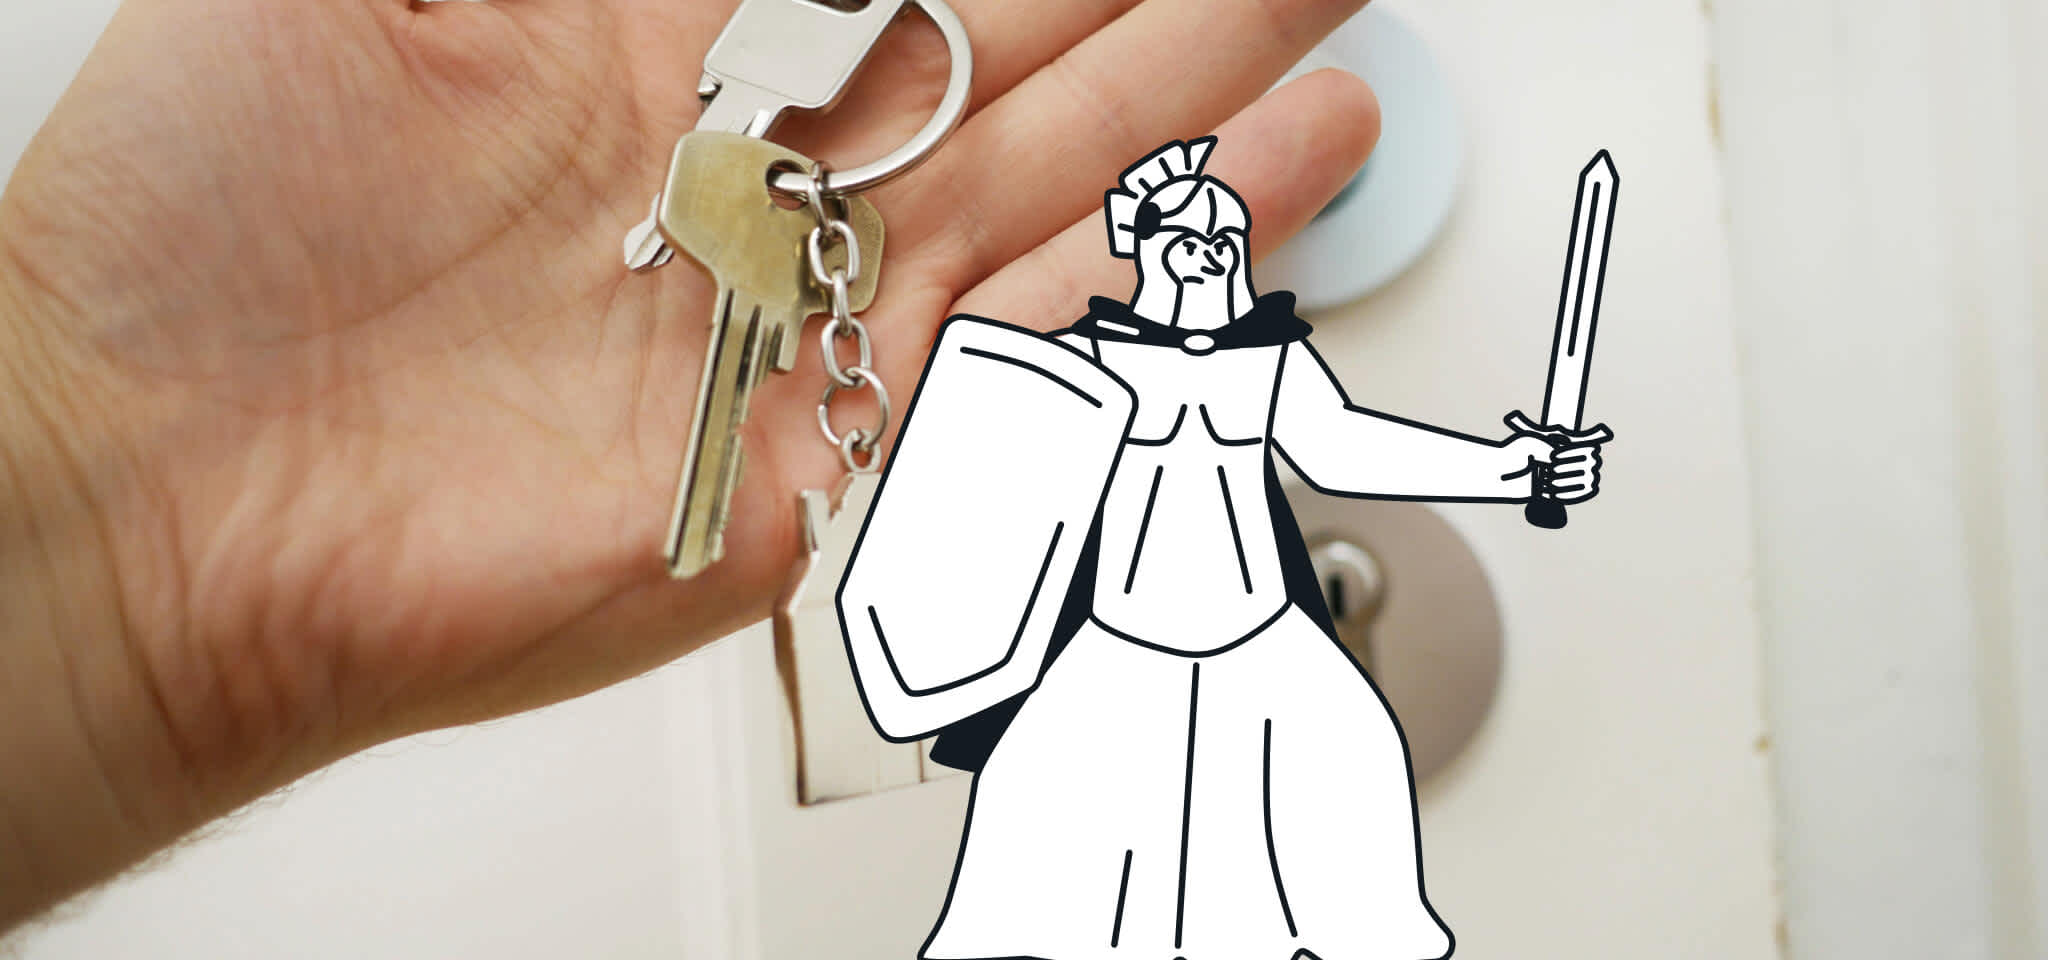 Armored goddess in front of hand with keys